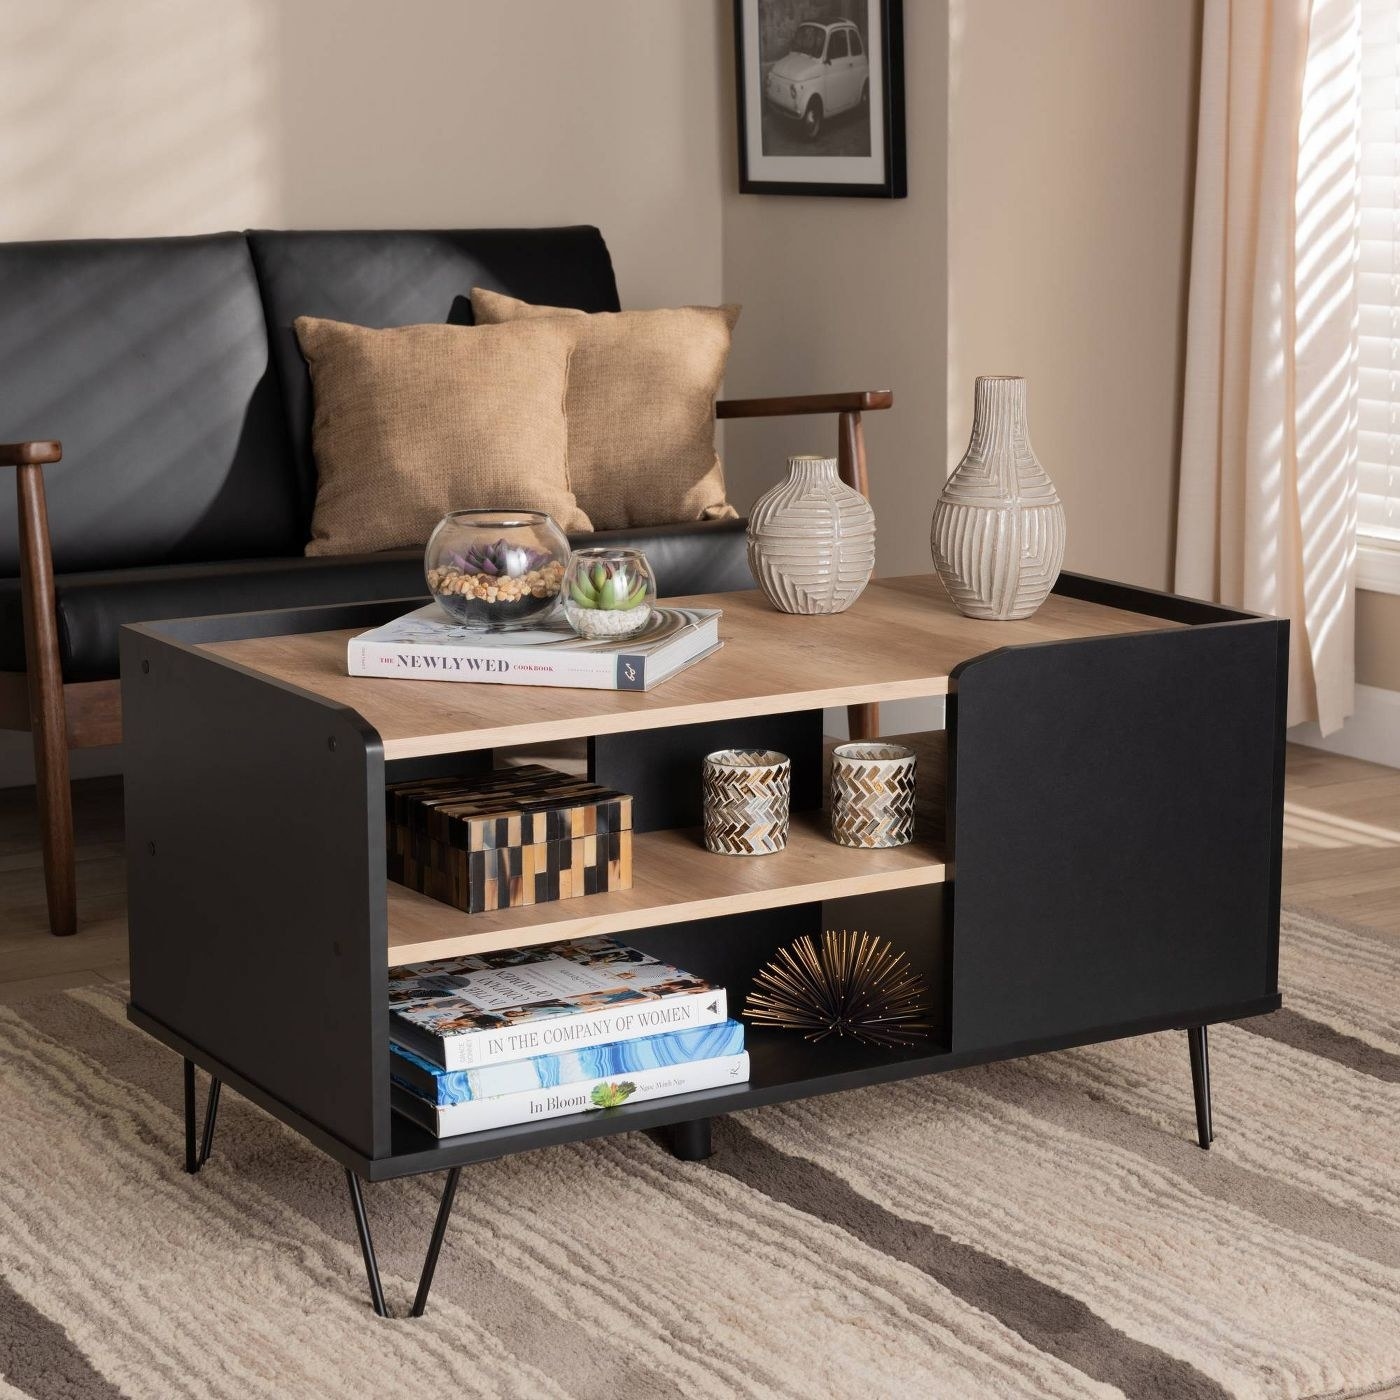 the black and brown coffee table with an interior shelf